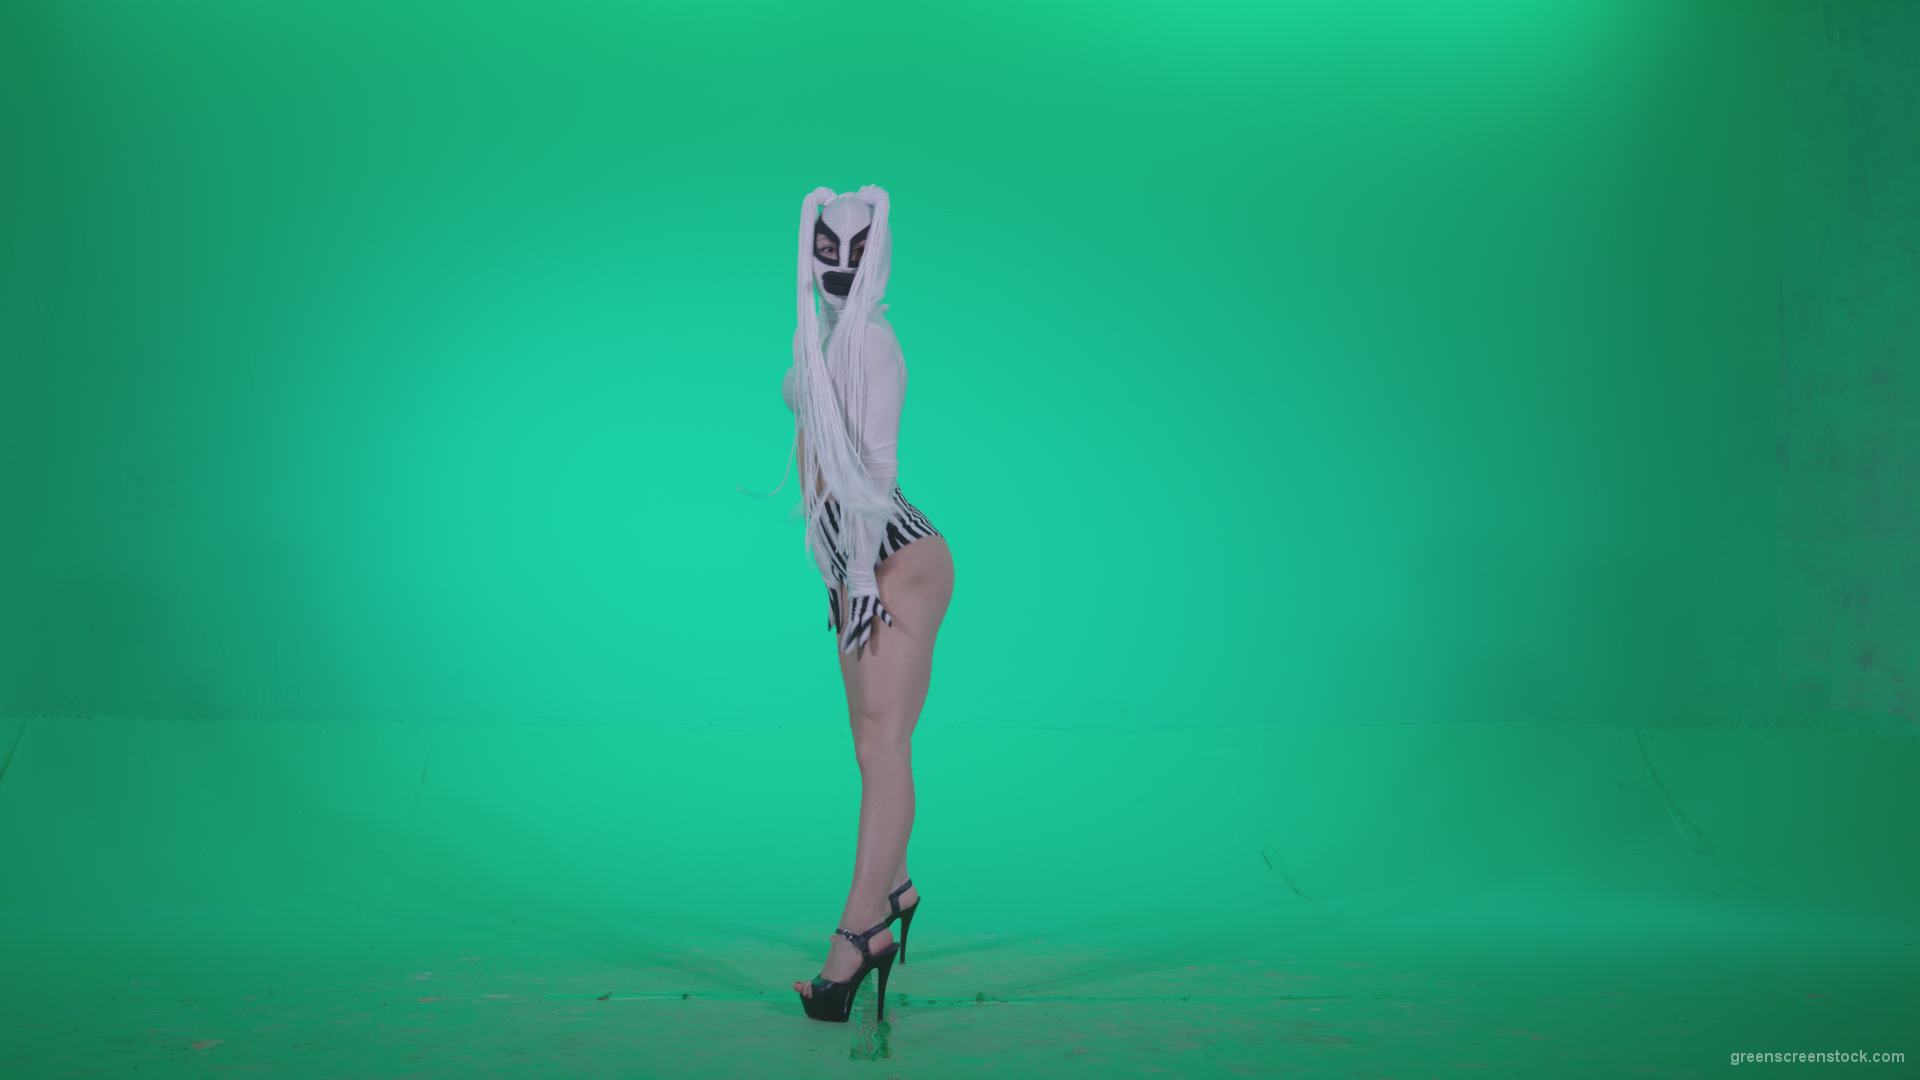 Go-go-Dancer-with-Latex-Top-t2-Green-Screen-Video-Footage_004 Green Screen Stock